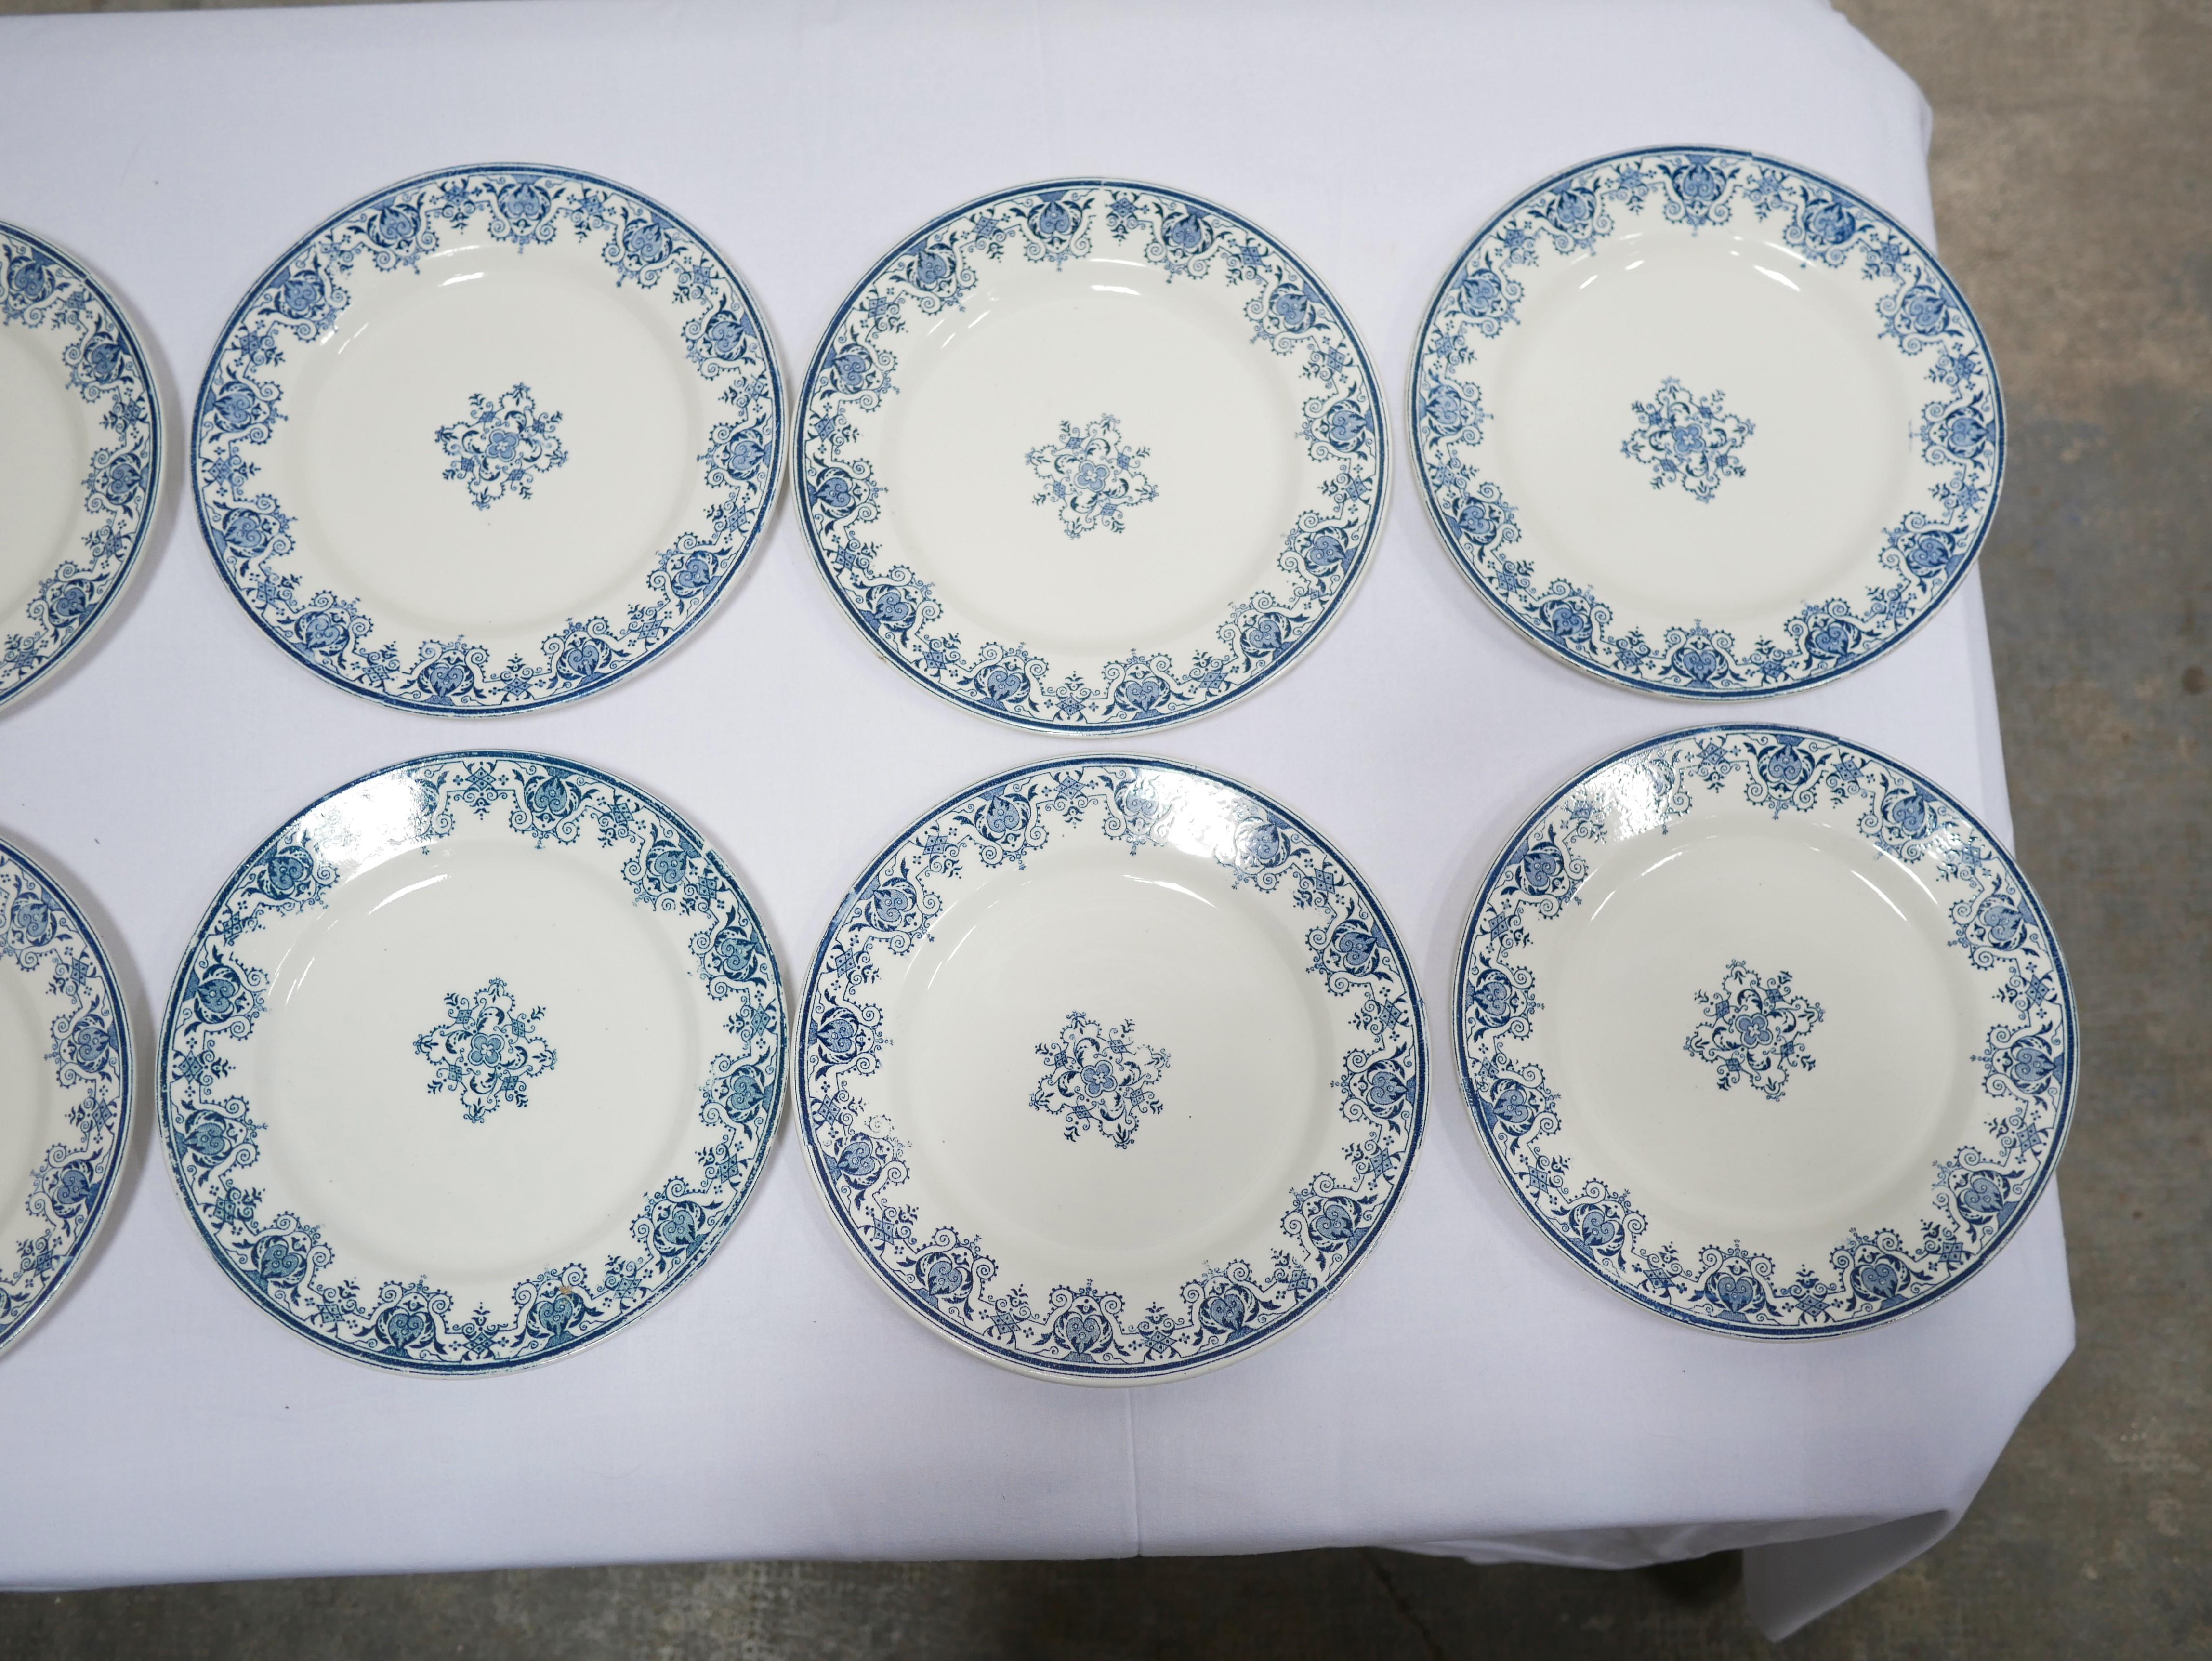 Ceramic Series of 10 Old Terre De Fer Plates by L.G. for the Clairefontaine Earthenware For Sale